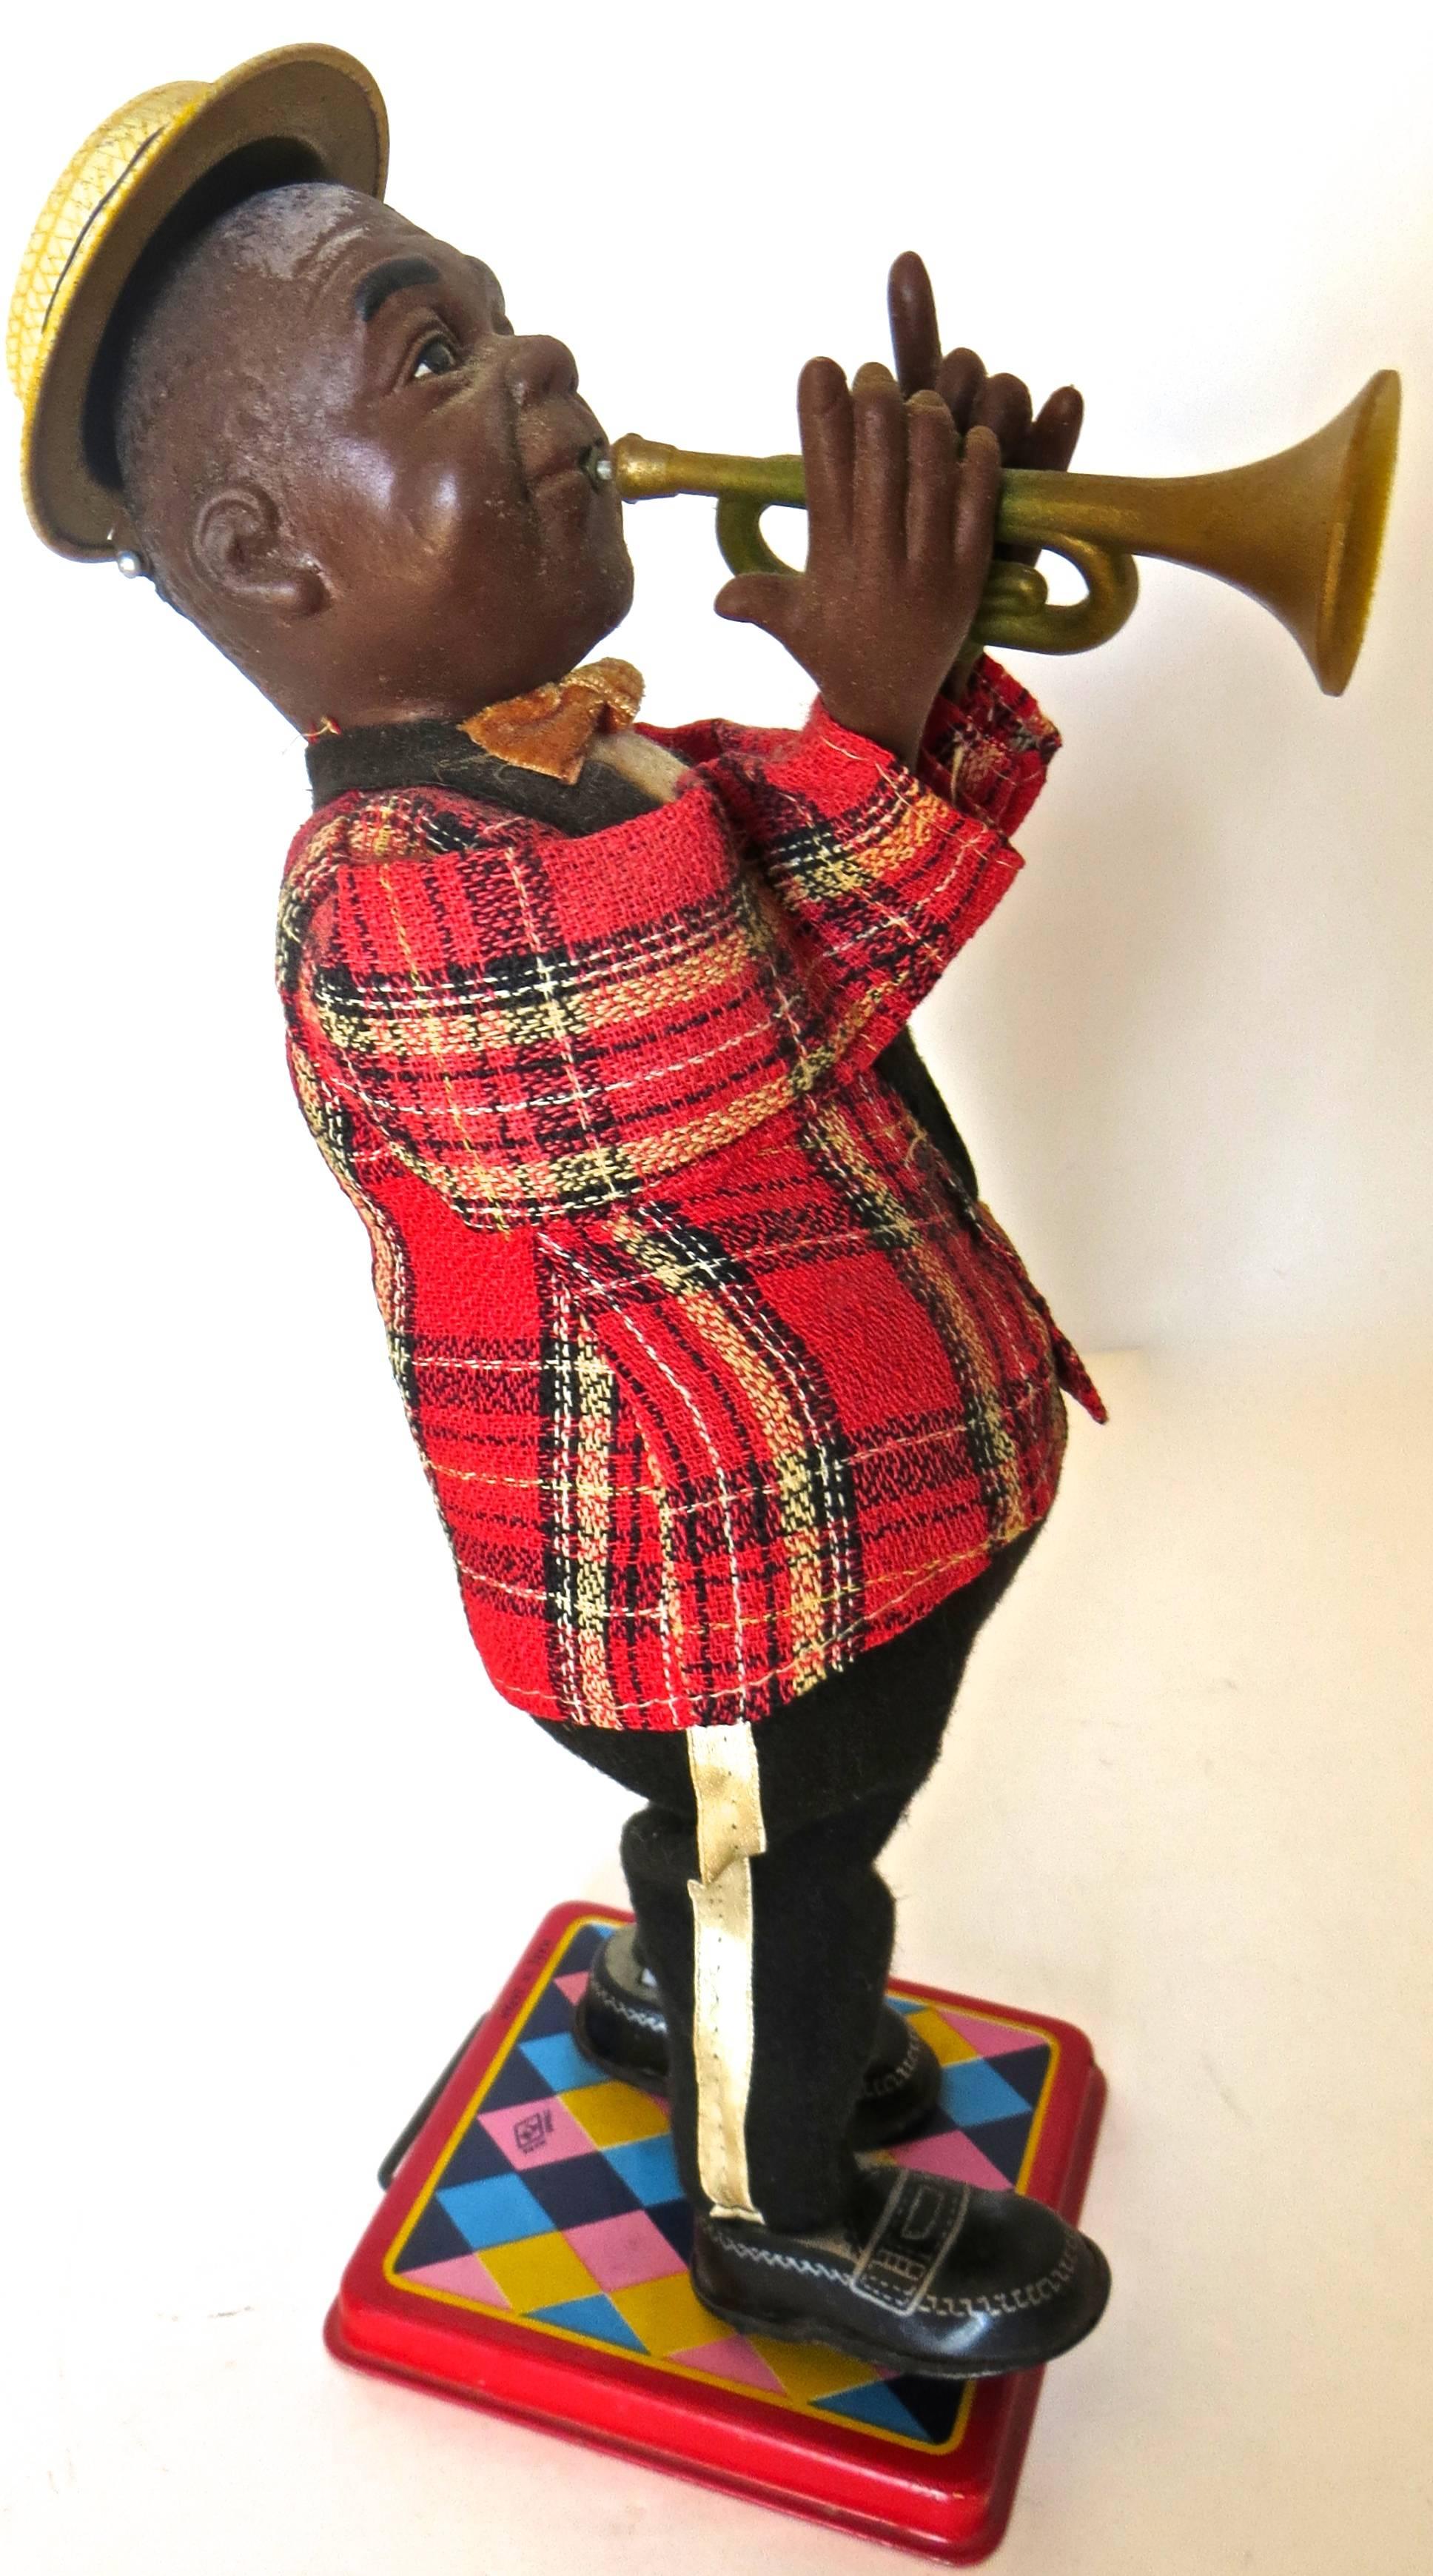 Molded Louis Armstrong 'Satchmo' Wind Up Toy, American, circa 1950's